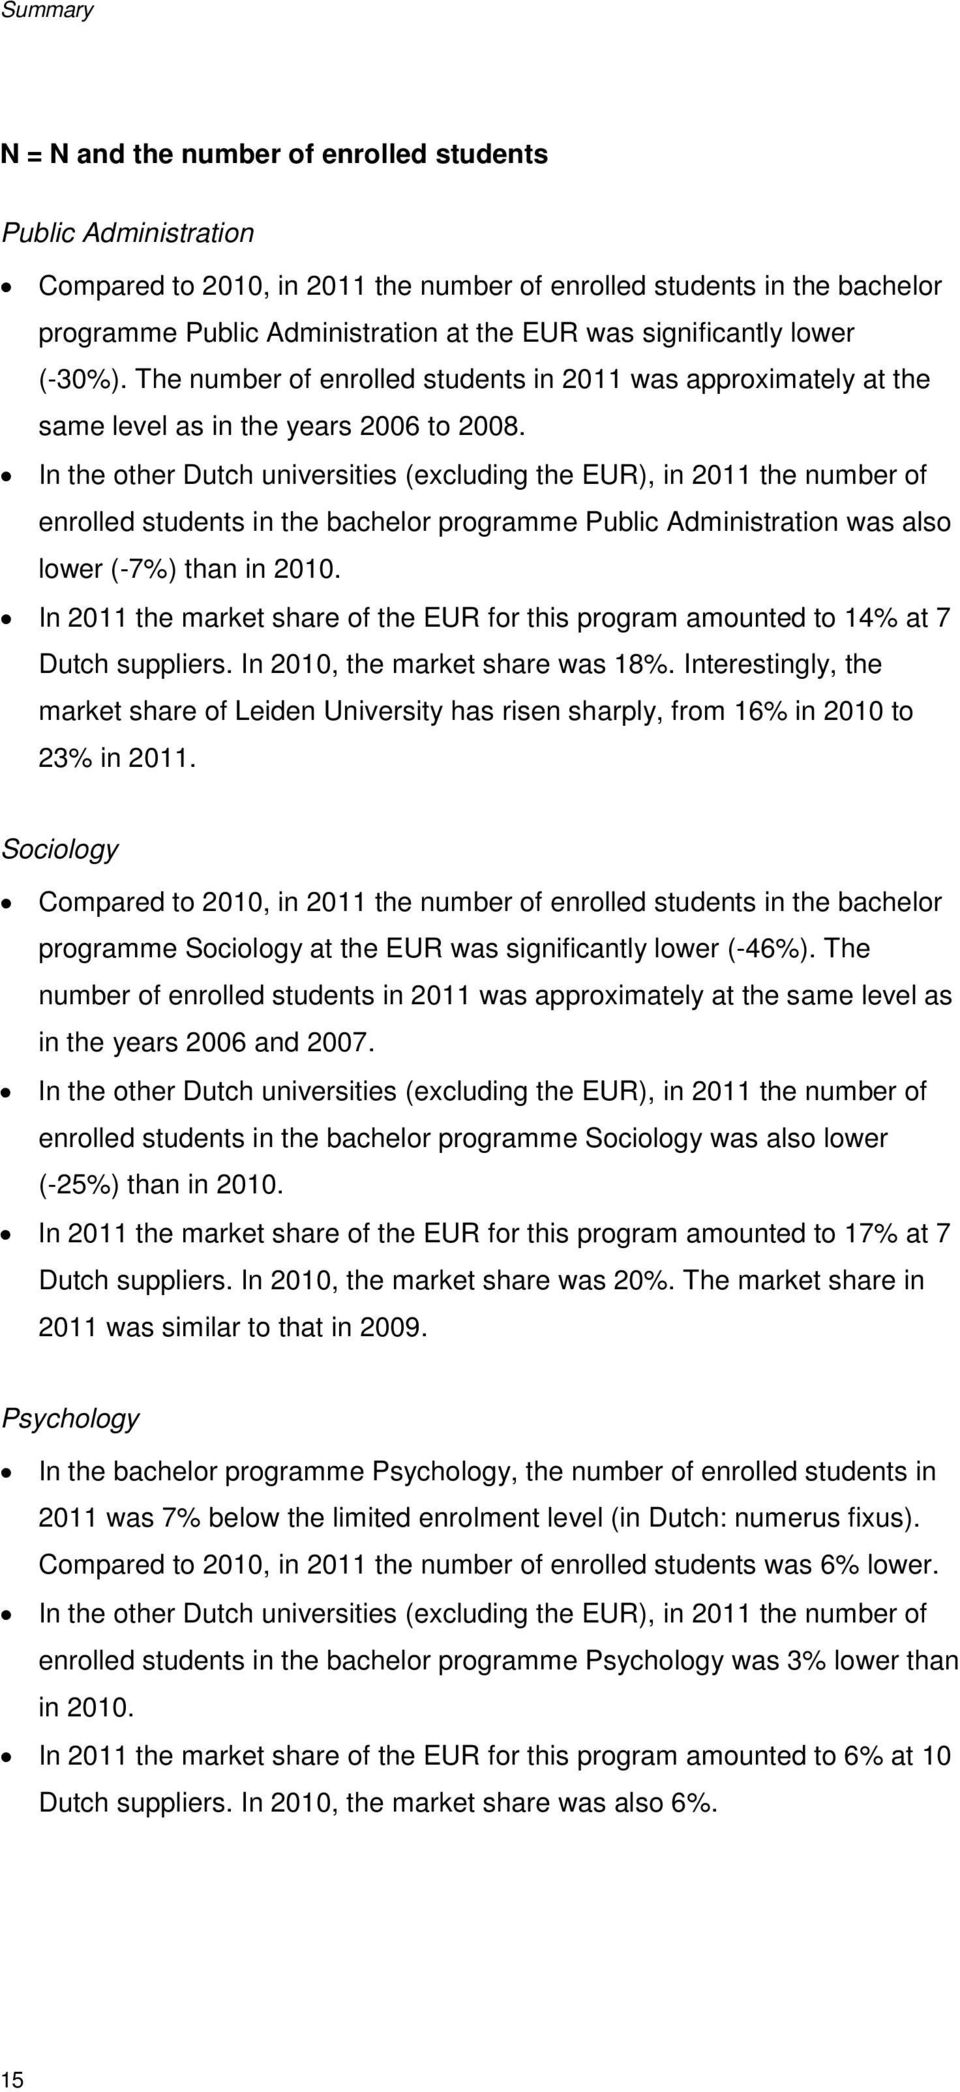 In the other Dutch universities (excluding the EUR), in 2011 the number of enrolled students in the bachelor programme Public Administration was also lower (-7%) than in 2010.